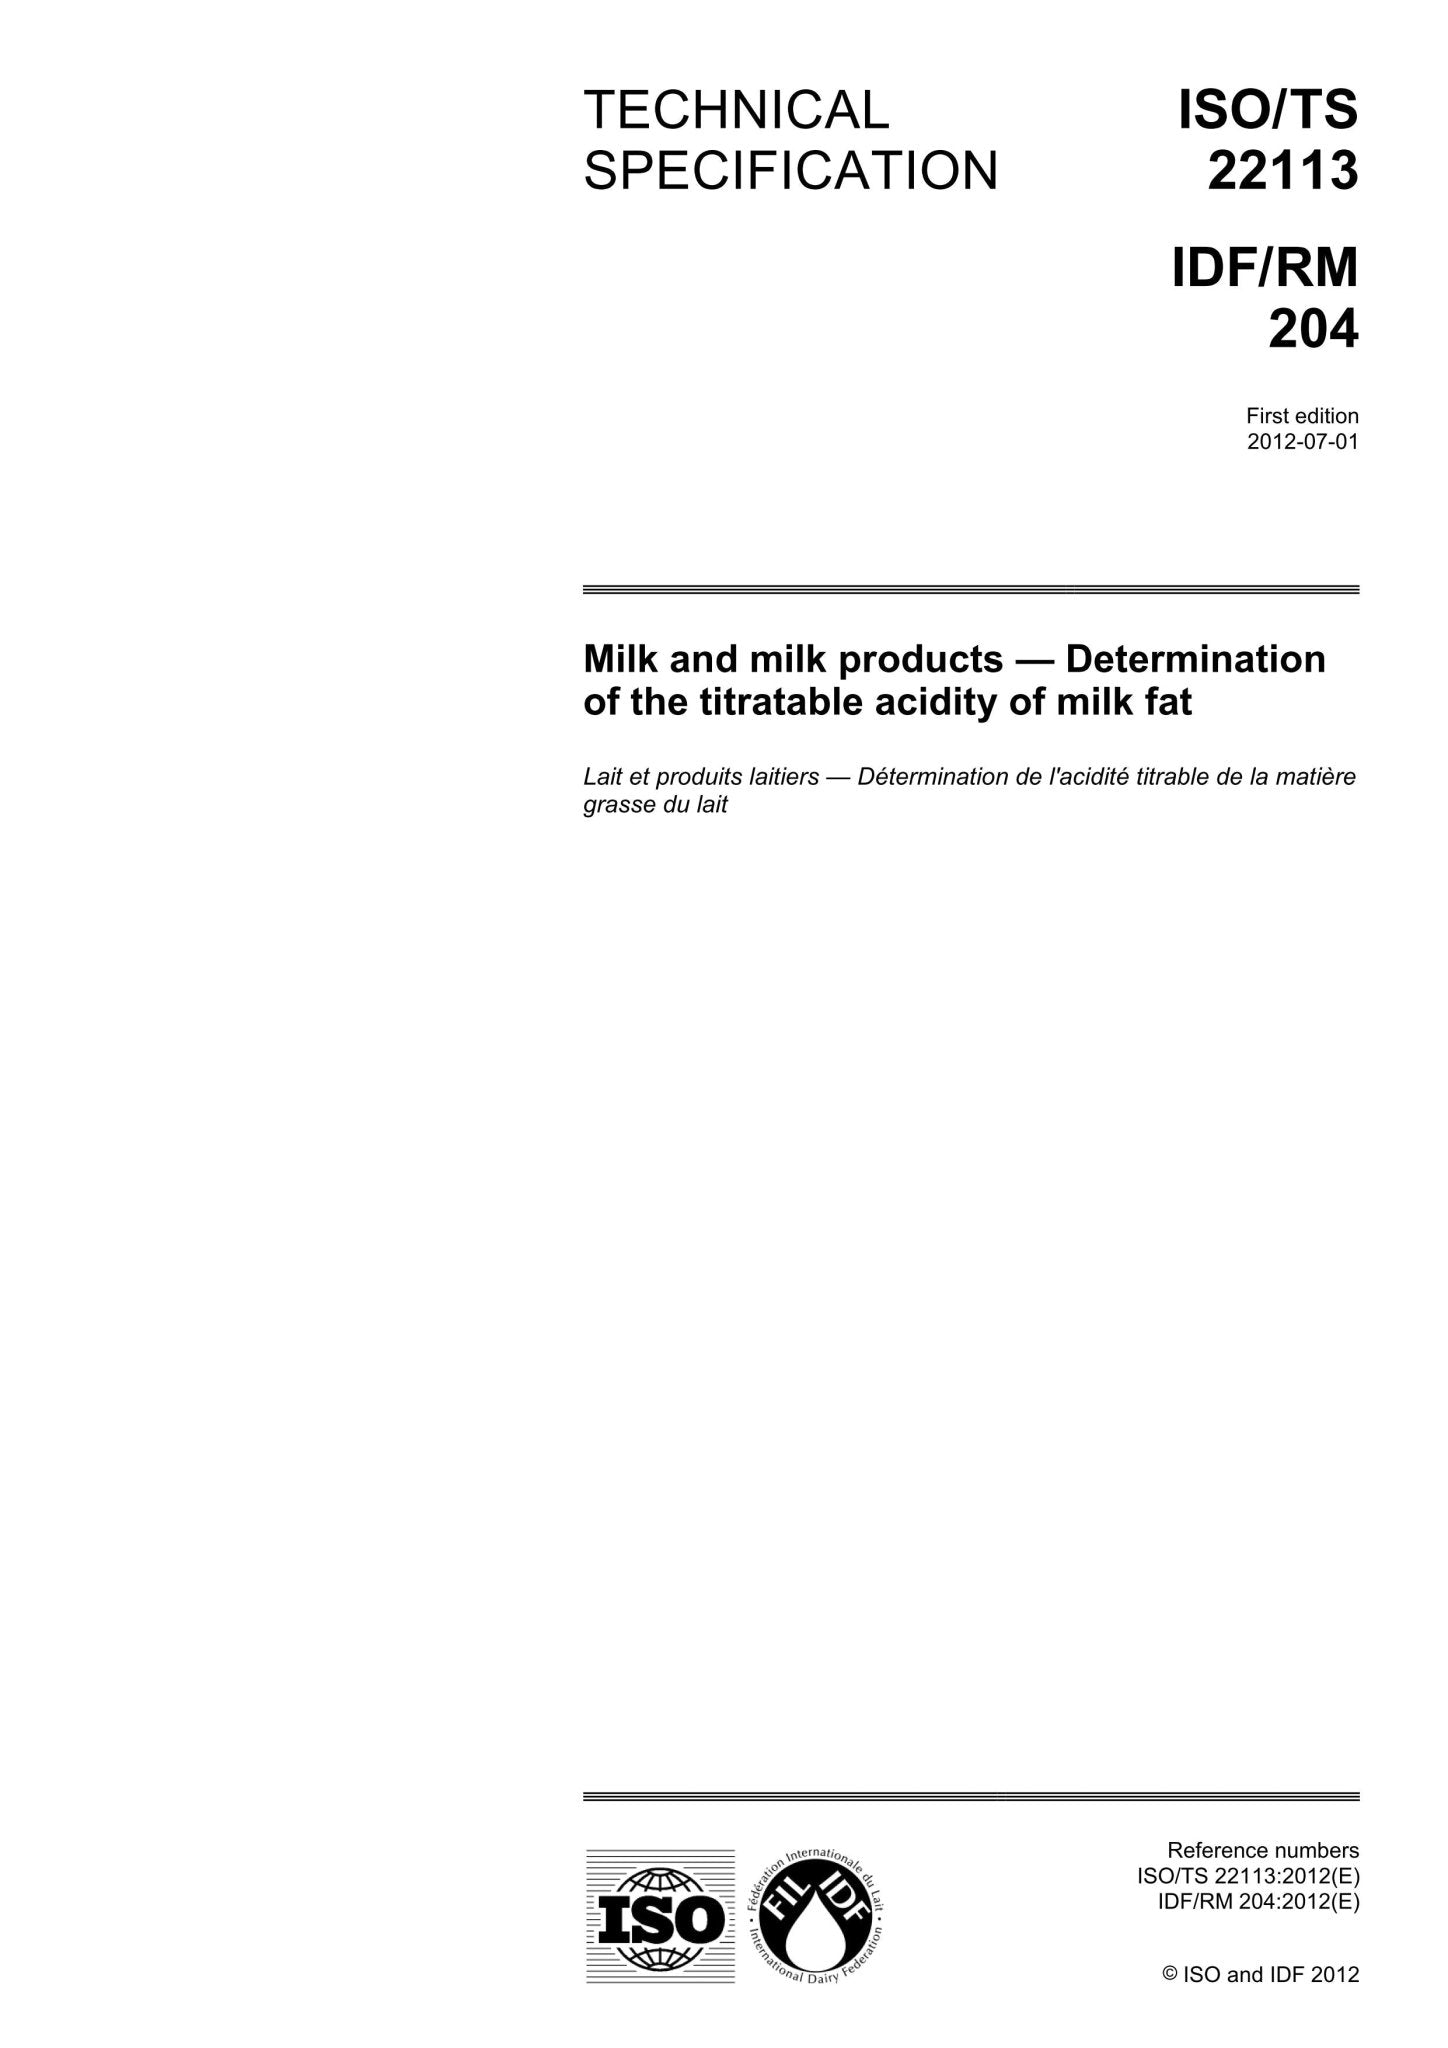 ISO/TS 22113 | IDF/RM 204: 2012 - Milk and milk products - Determination of the titratable acidity of milk fat - FIL-IDF